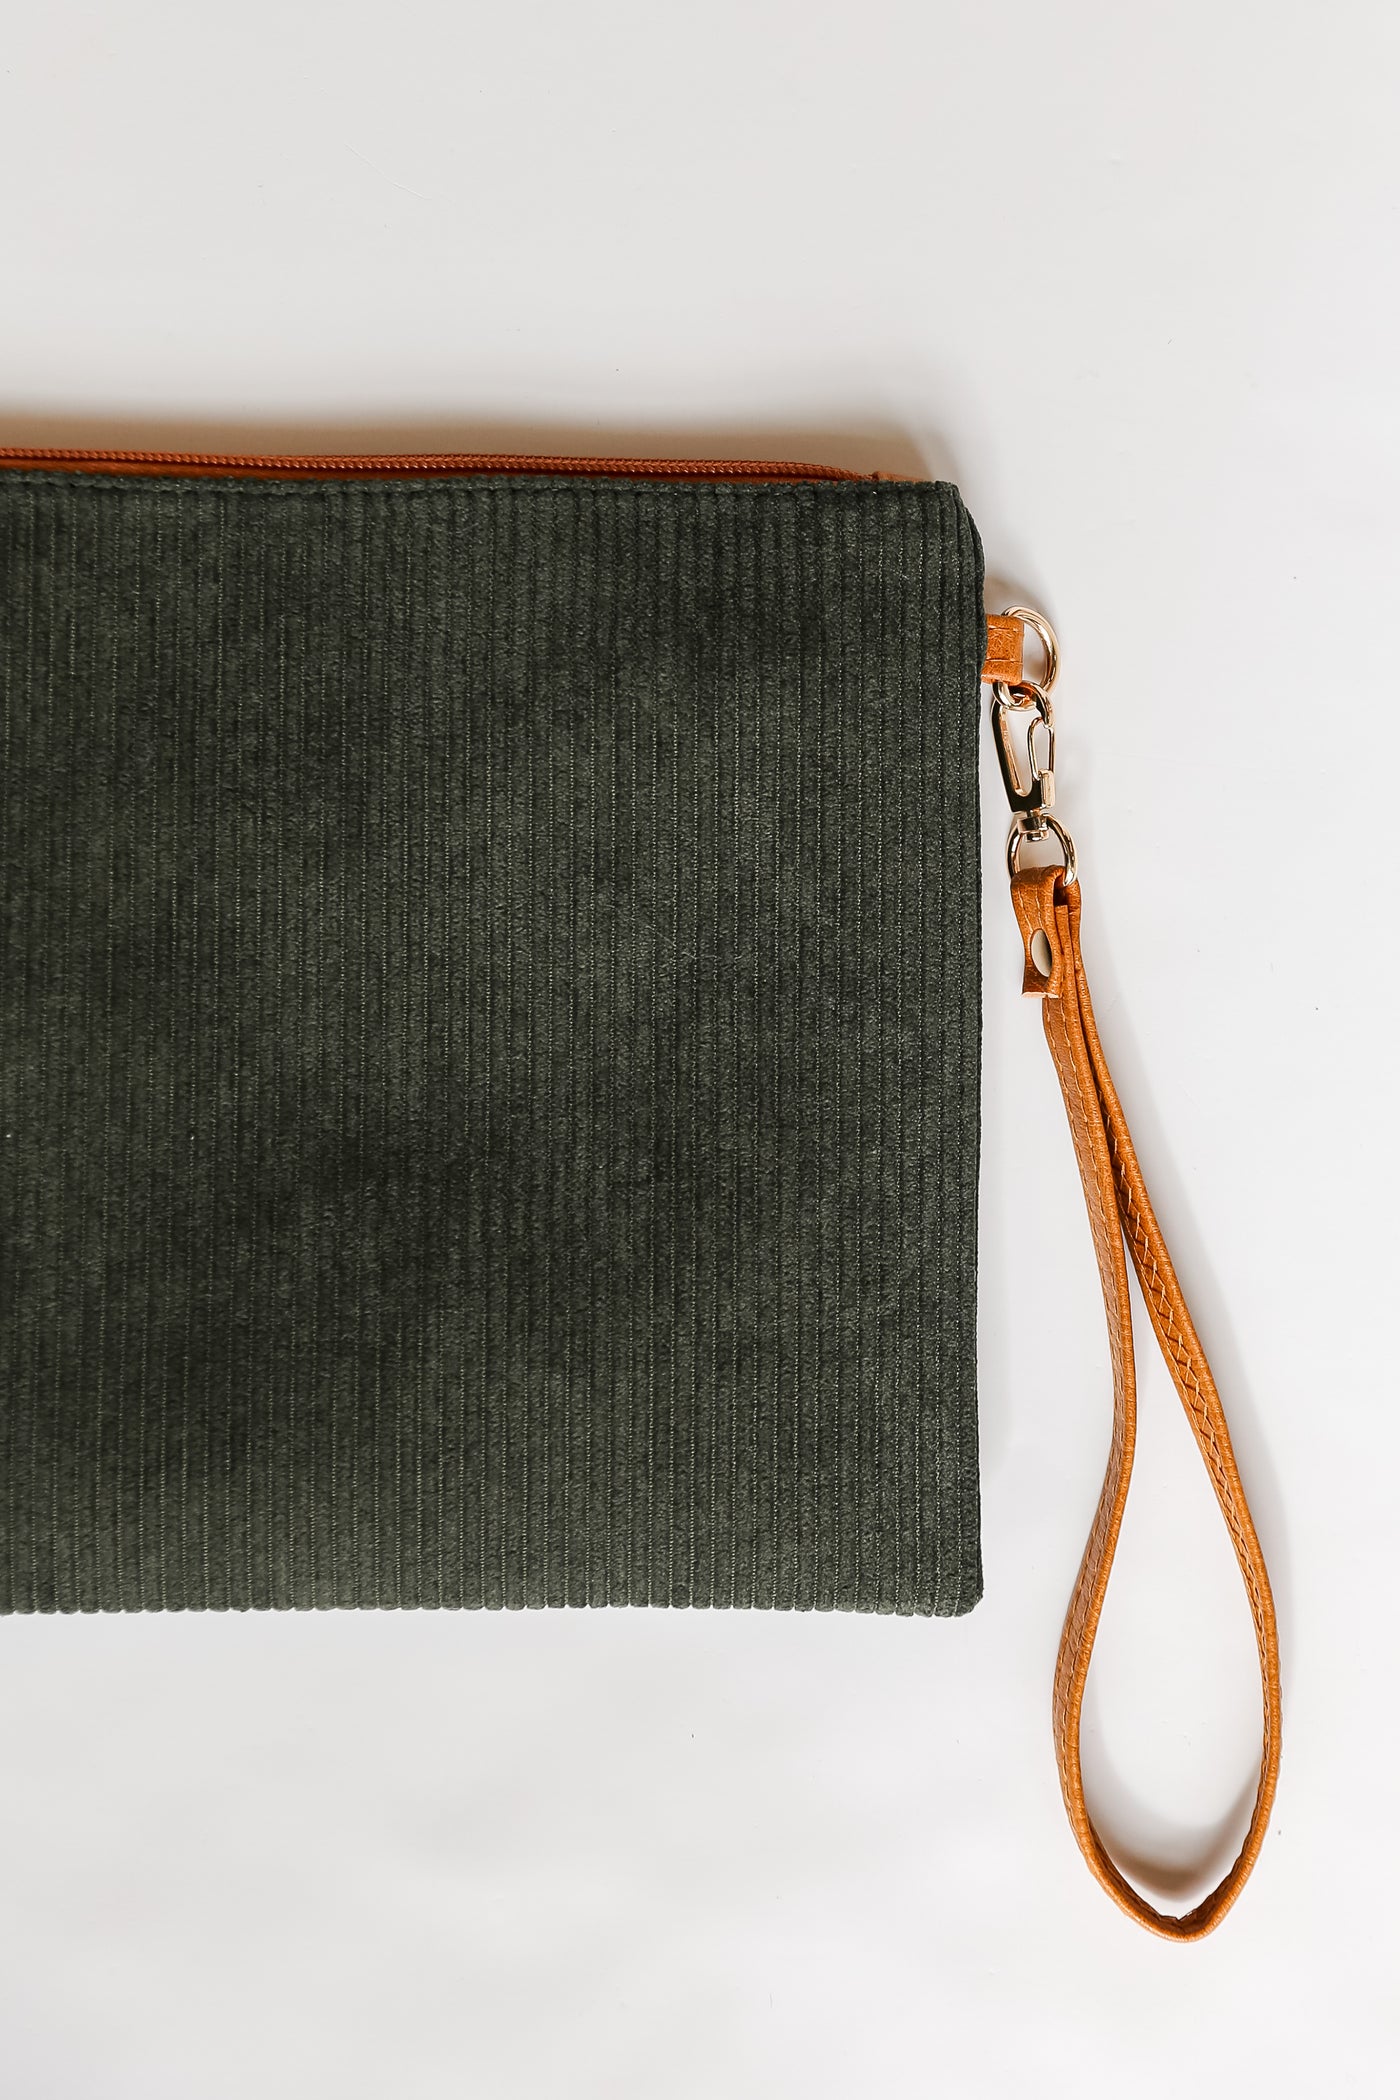 Olive Corduroy Crossbody Bag front view